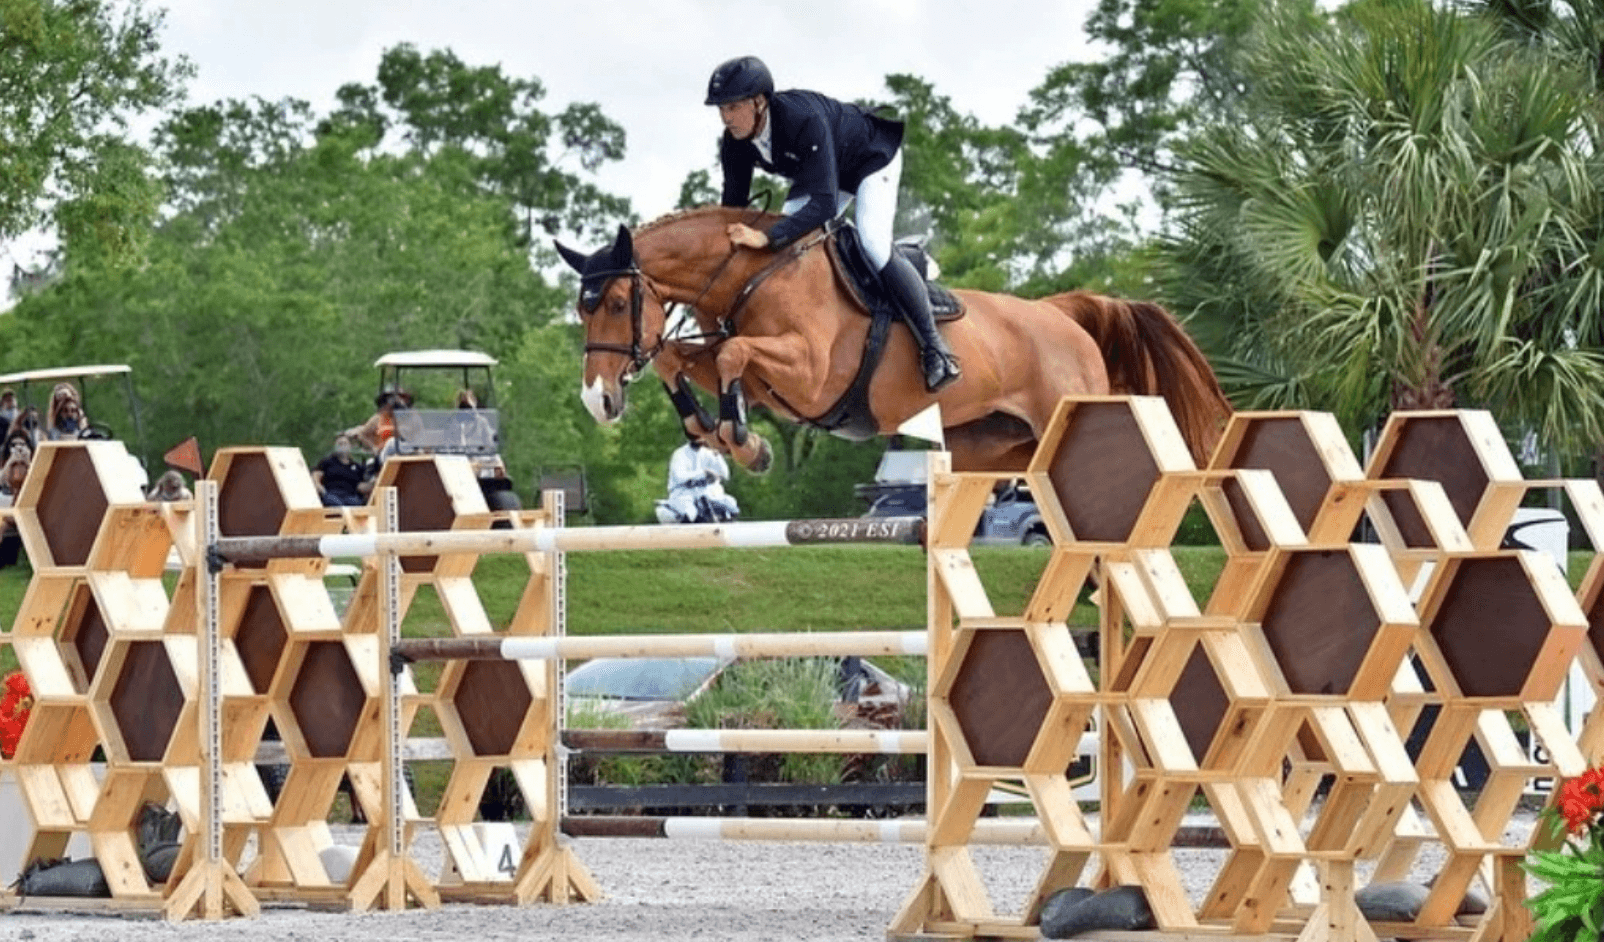 André Thieme and DSP Chakaria on top in Ocala World Cup Qualifier